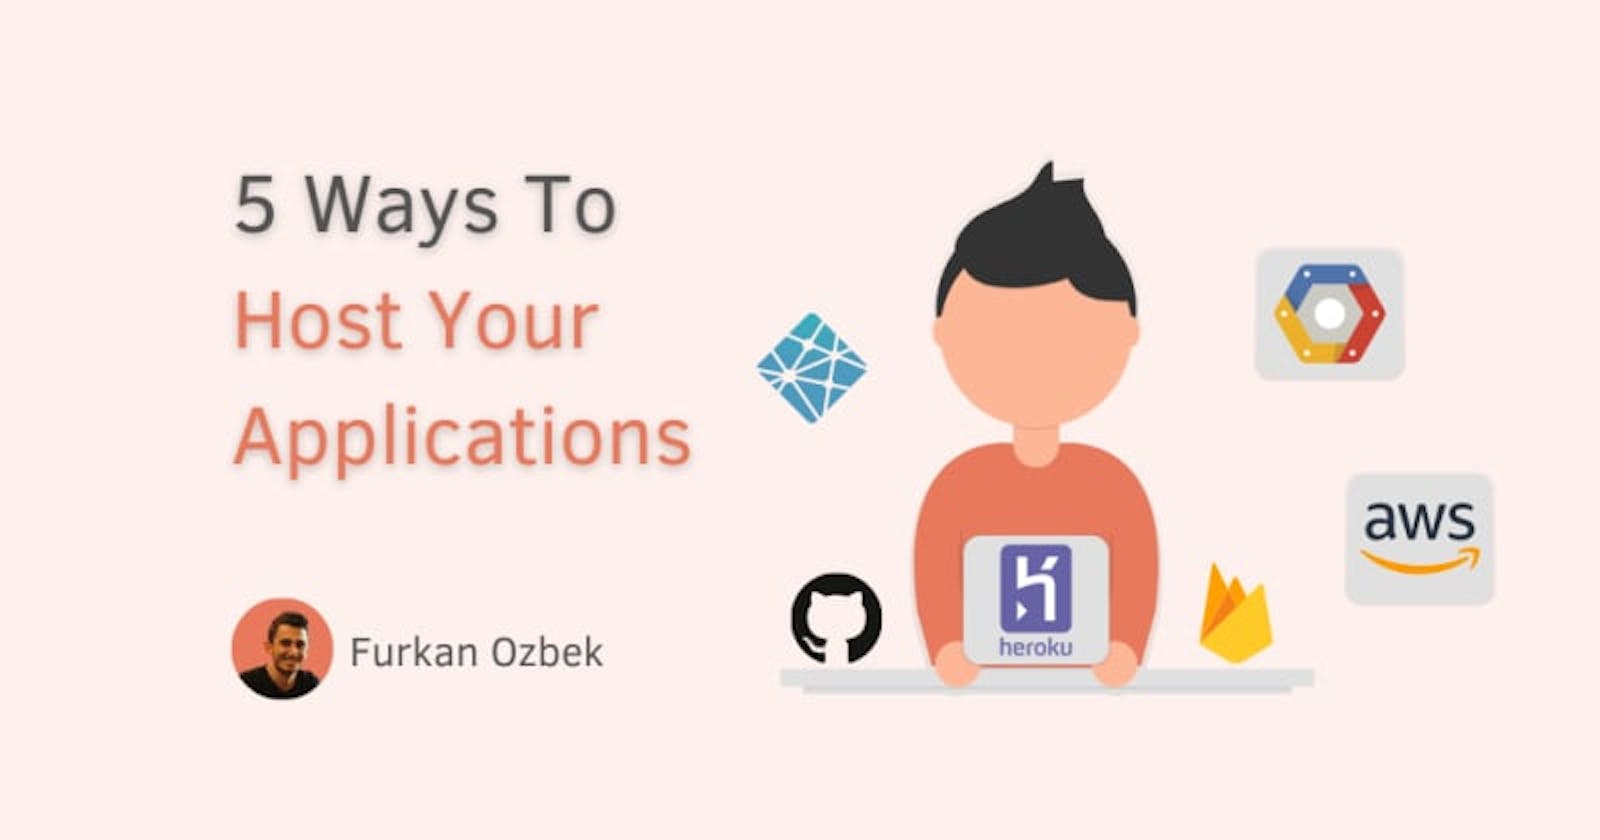 5 Ways To Host Your Applications